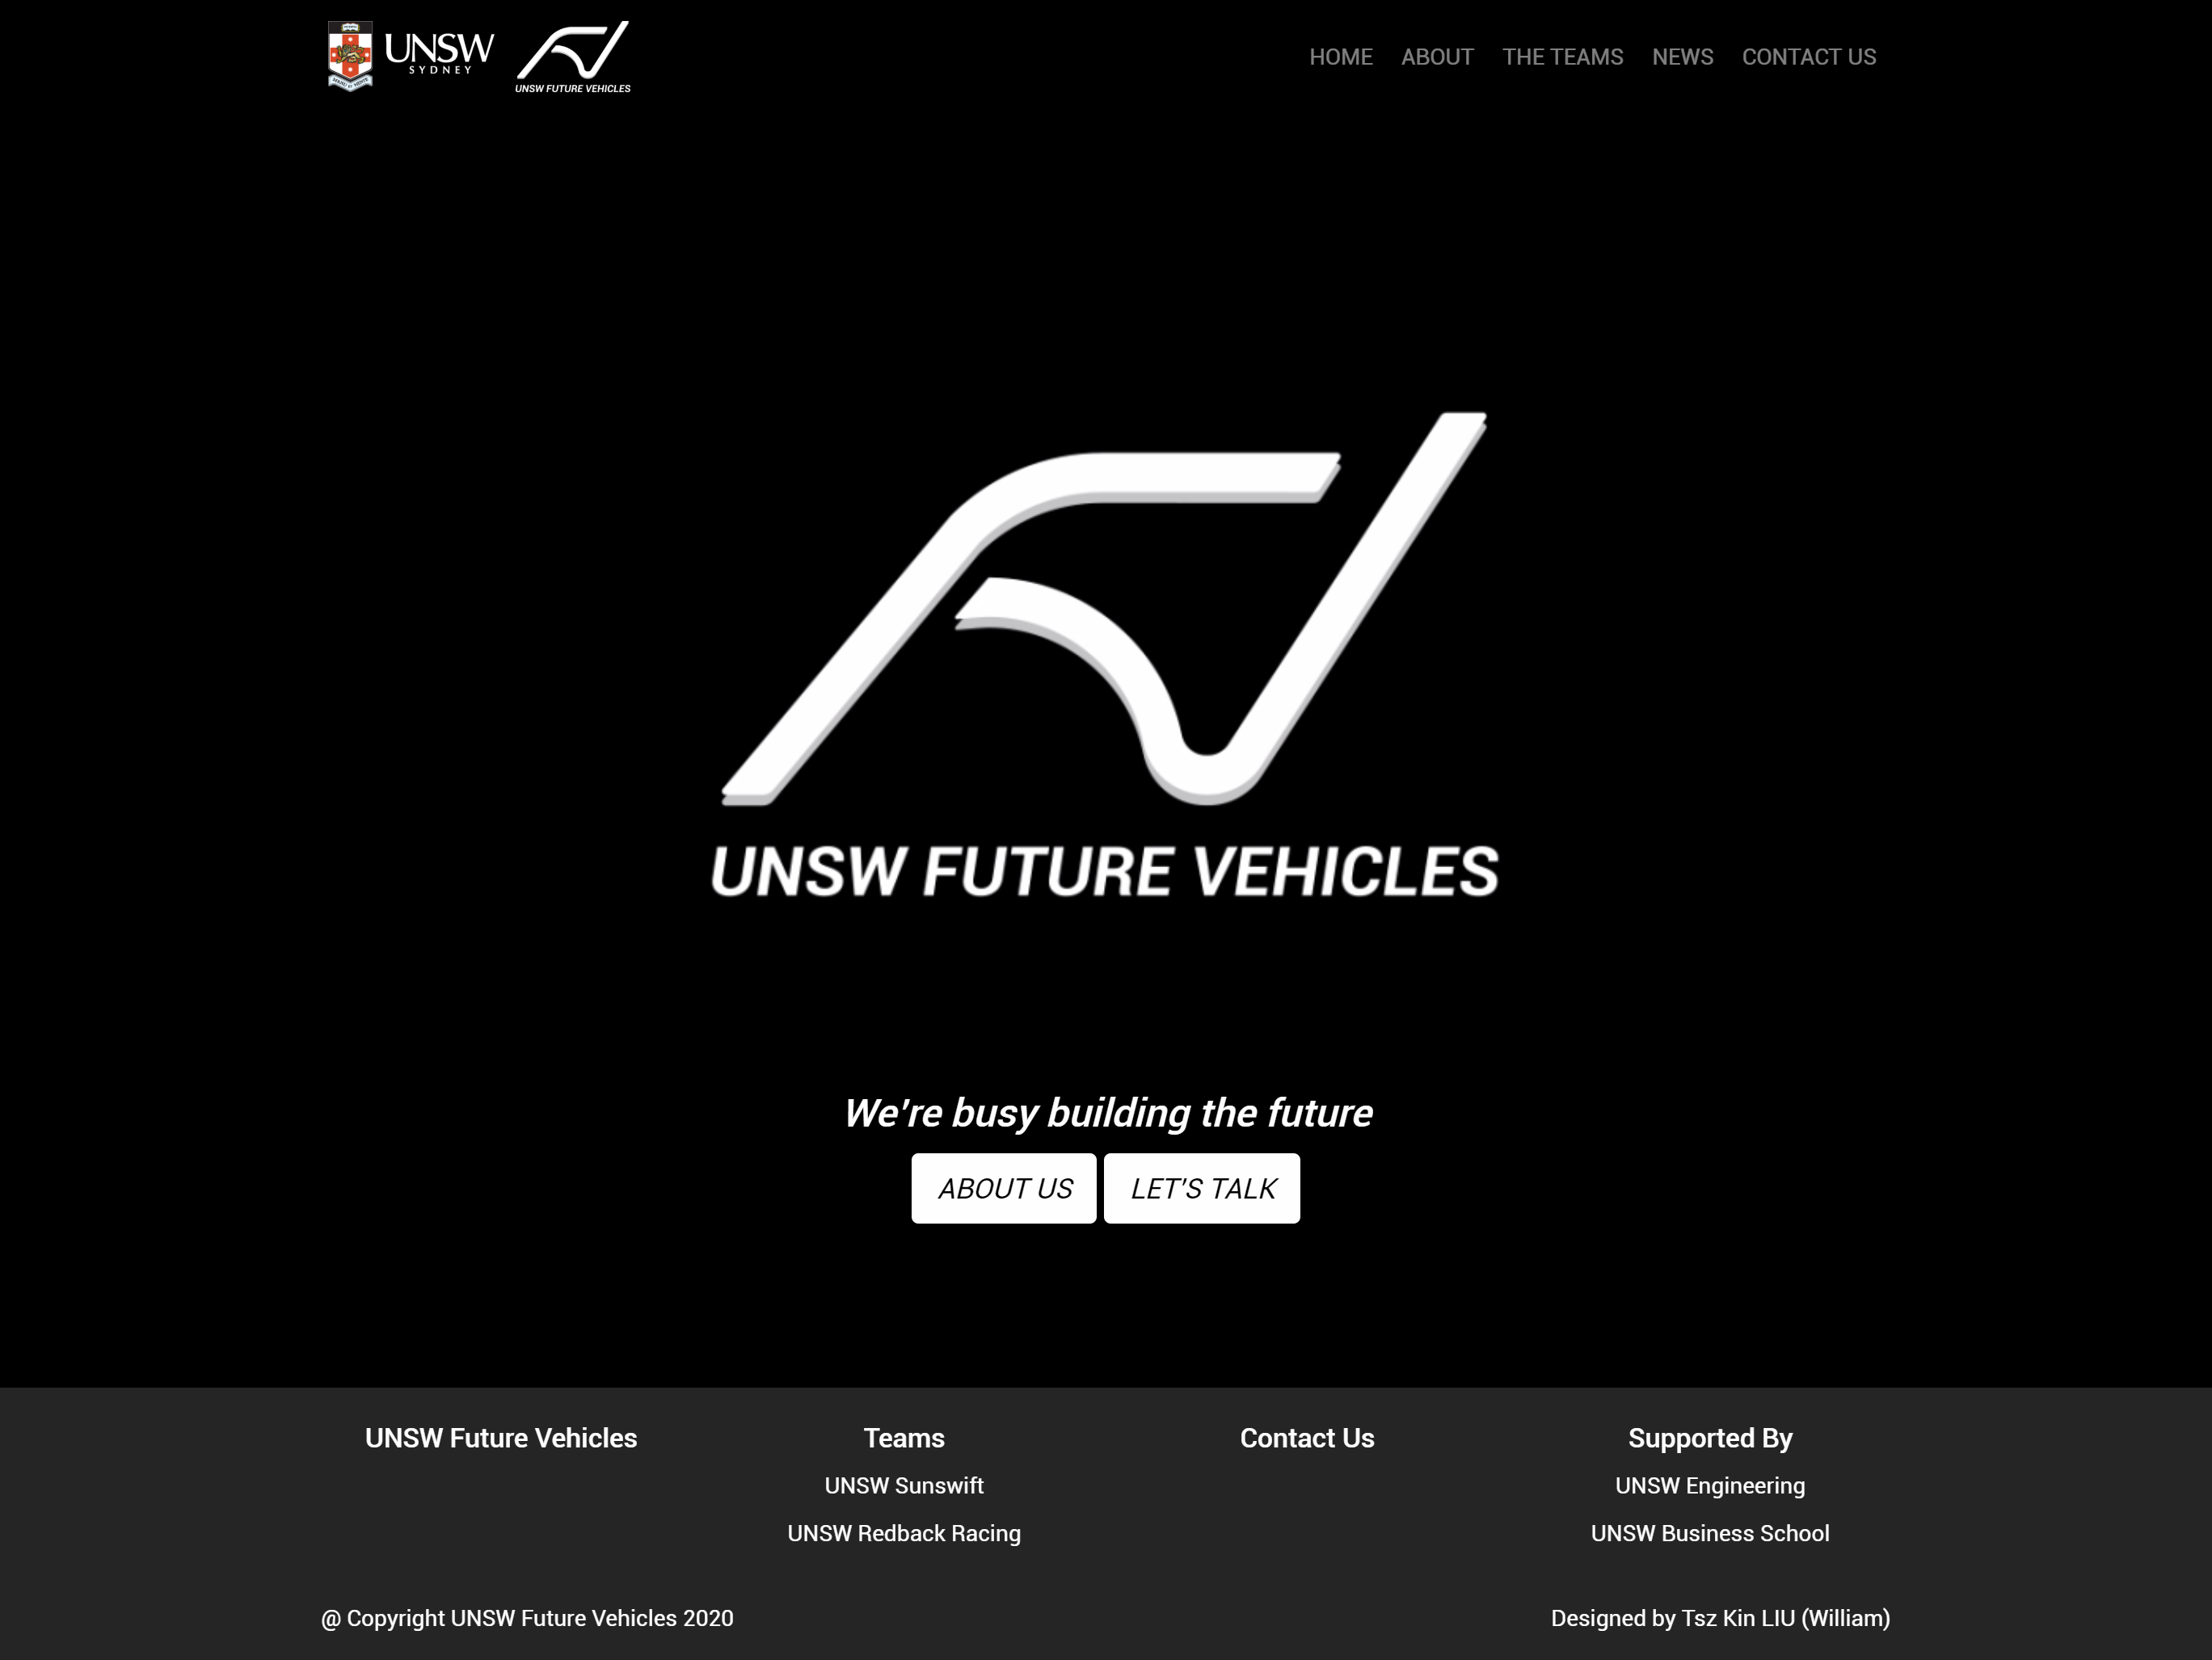 Image 1 of UNSW Future Vehicles